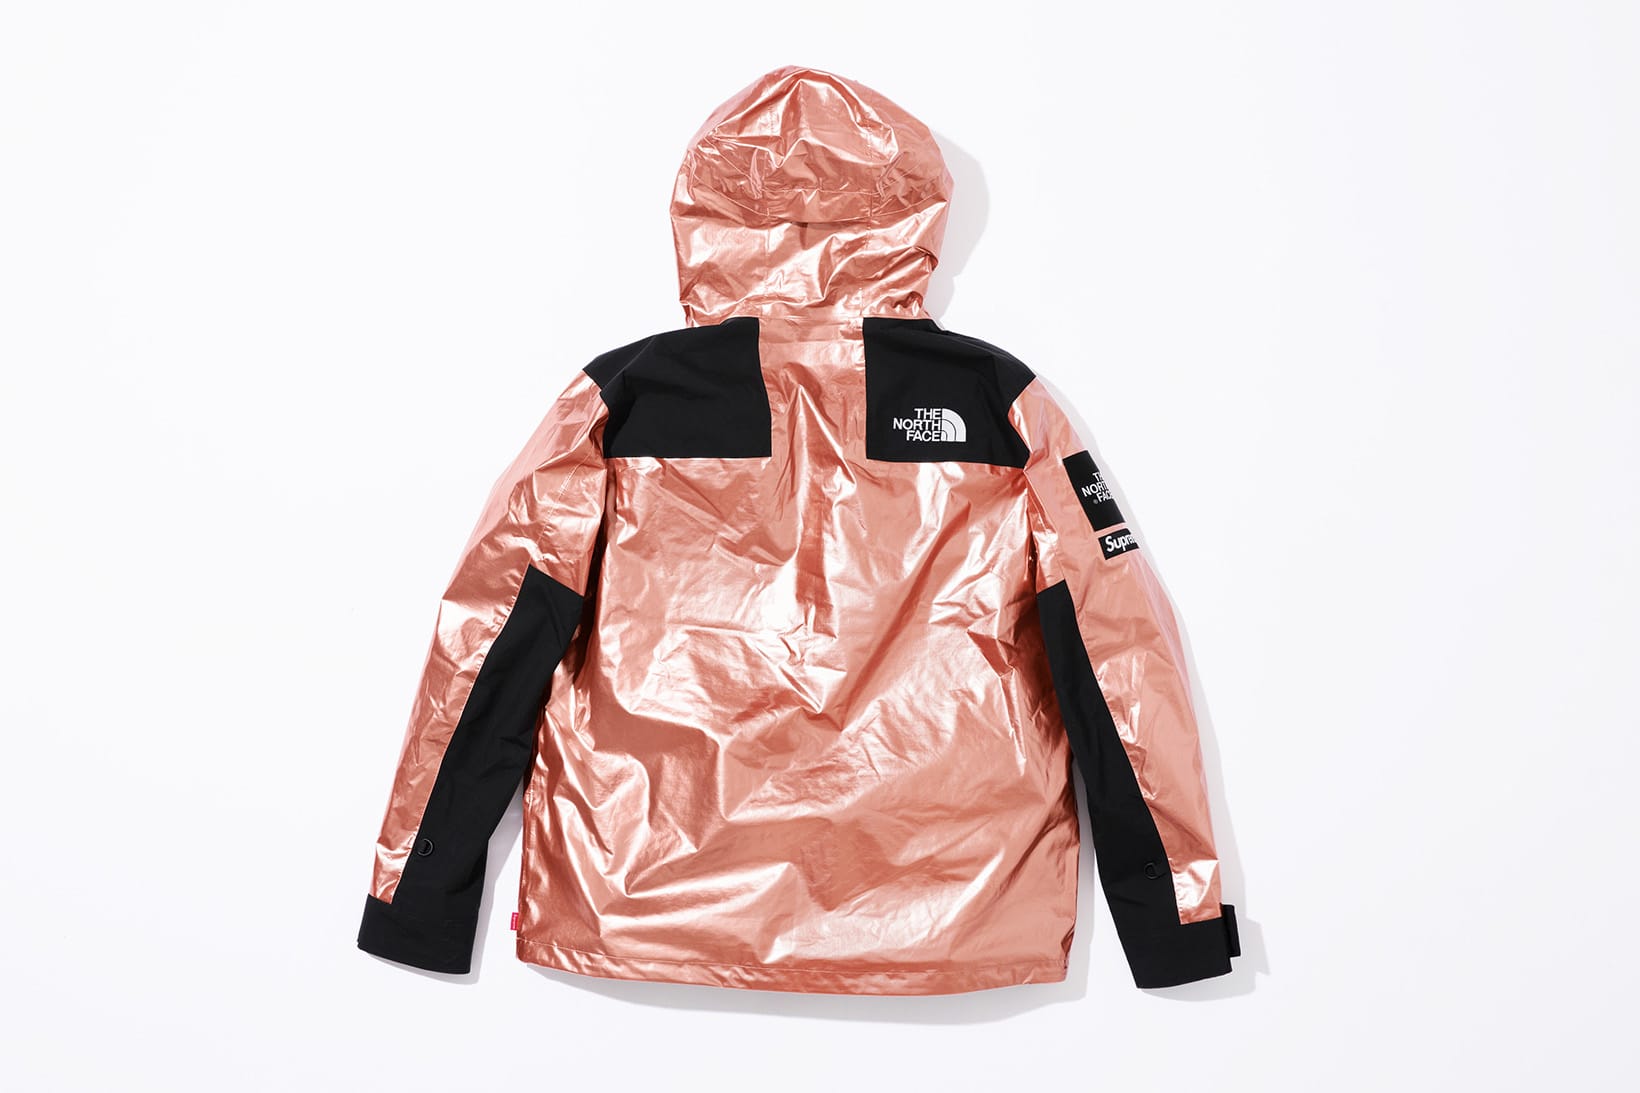 North Face Supreme Metallic Jacket Sale Online, UP TO 60% OFF 